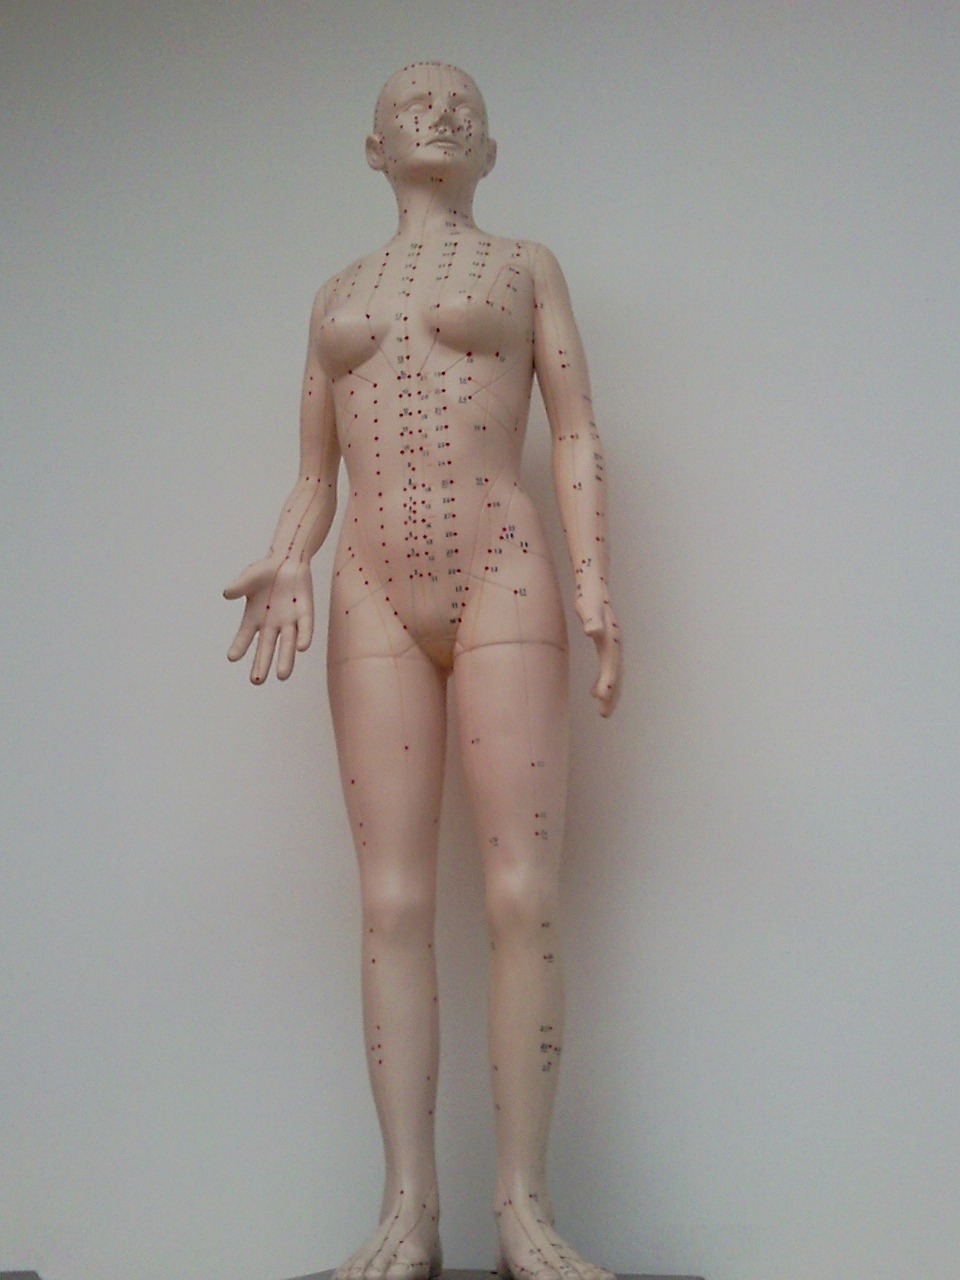 acupuncture puppet model free photo